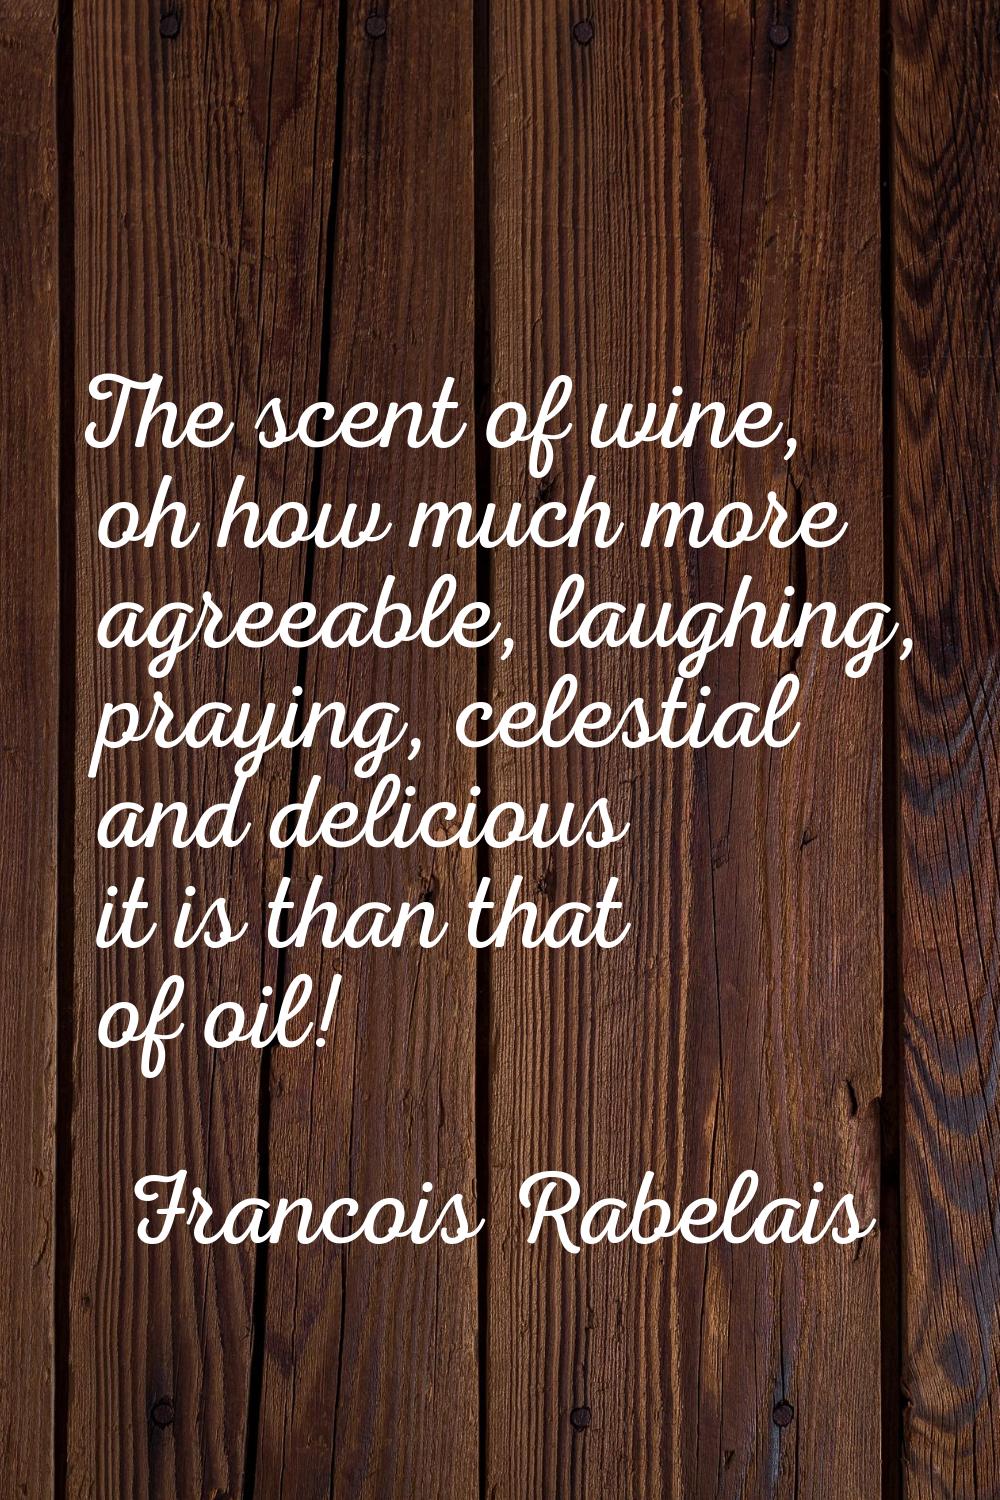 The scent of wine, oh how much more agreeable, laughing, praying, celestial and delicious it is tha